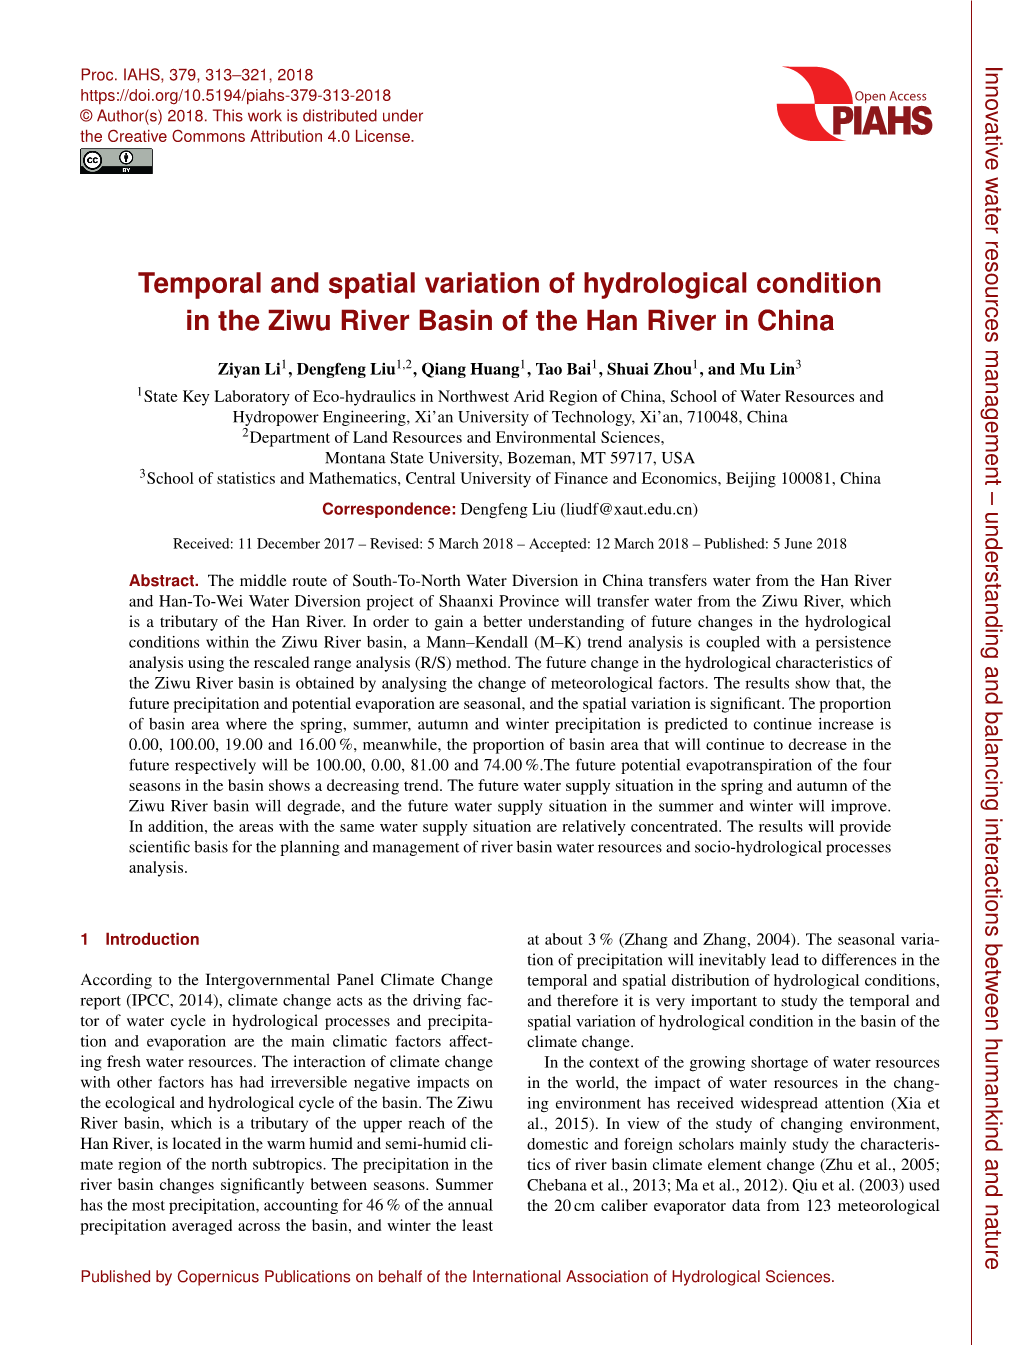 Temporal and Spatial Variation of Hydrological Condition in the Ziwu River Basin of the Han River in China